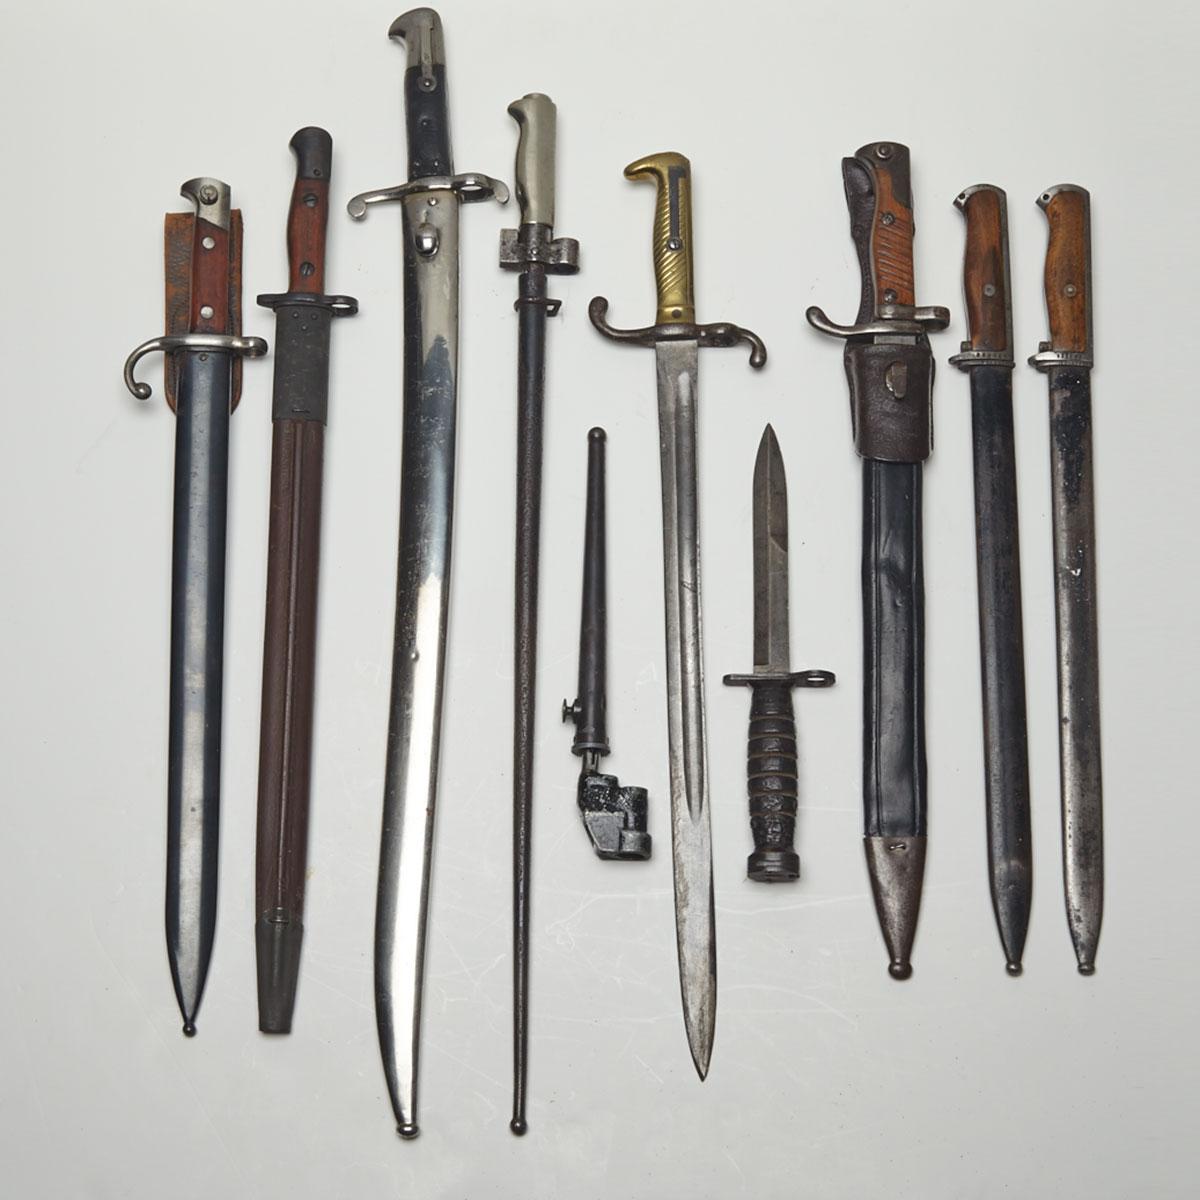 Miscellaneous Group of Ten Bayonets, early 20th century